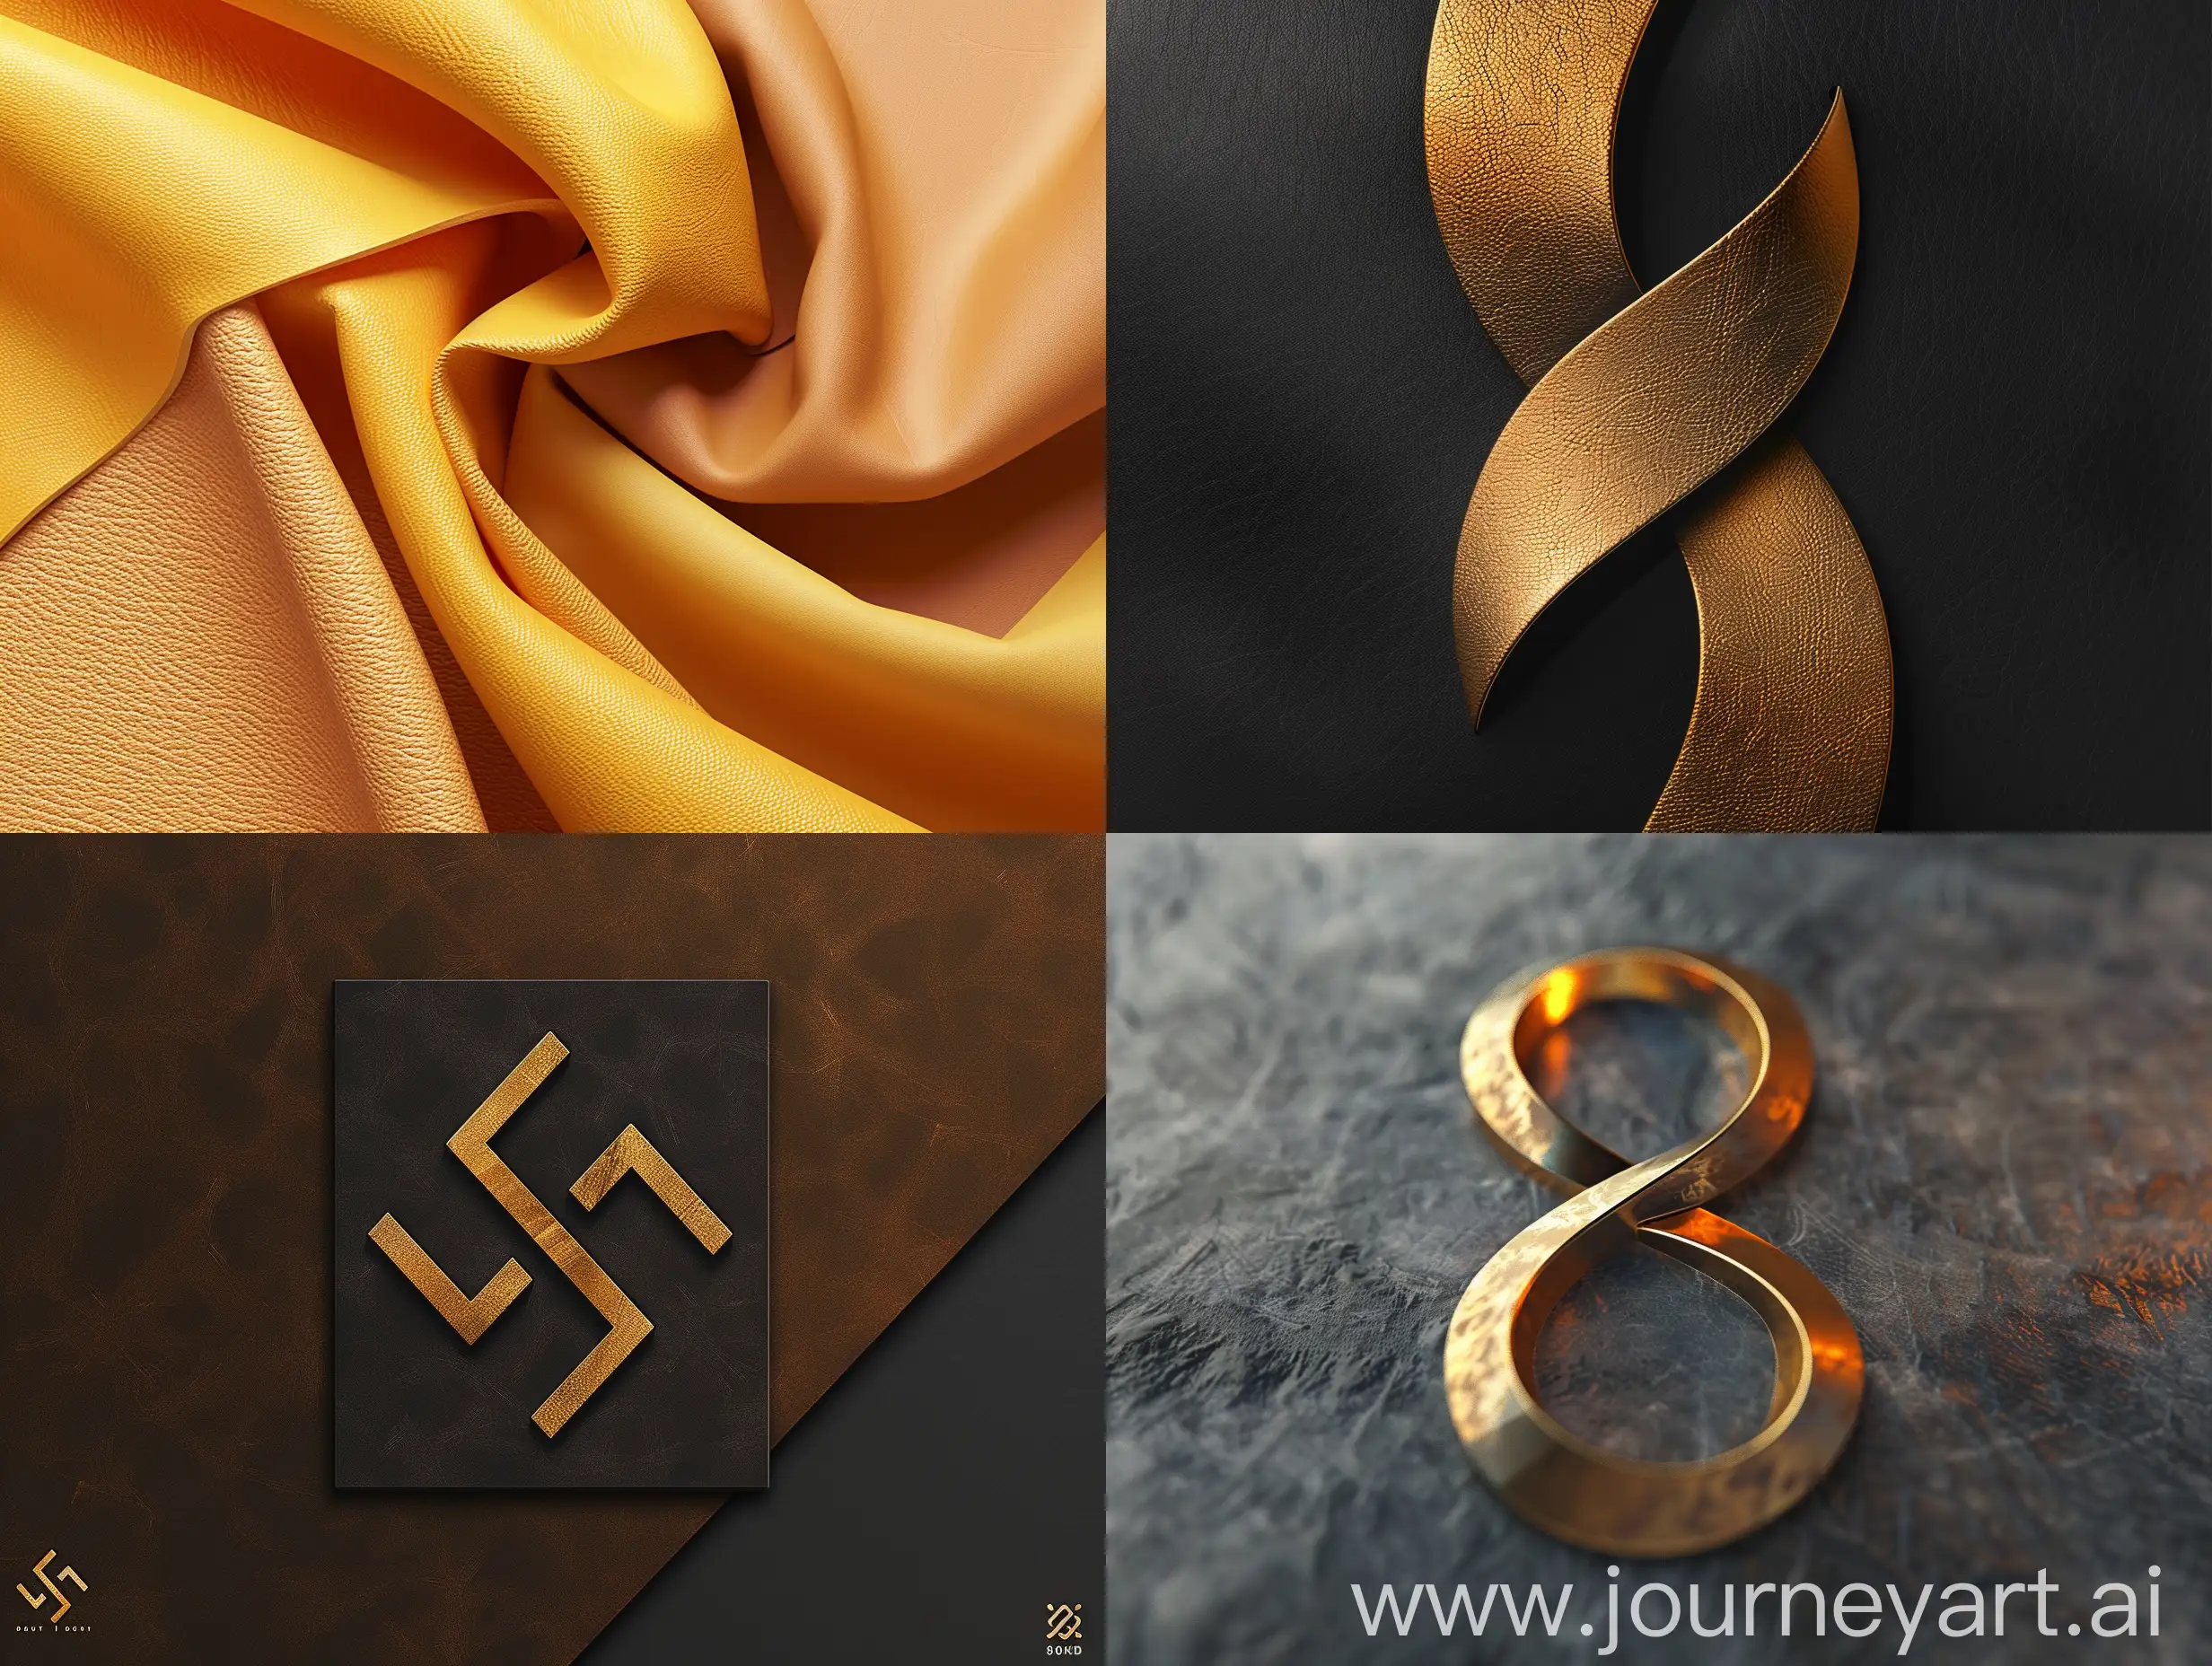 Luxurious-Leather-Product-Logo-in-Deep-Gold-and-Refreshing-Skin-Tones